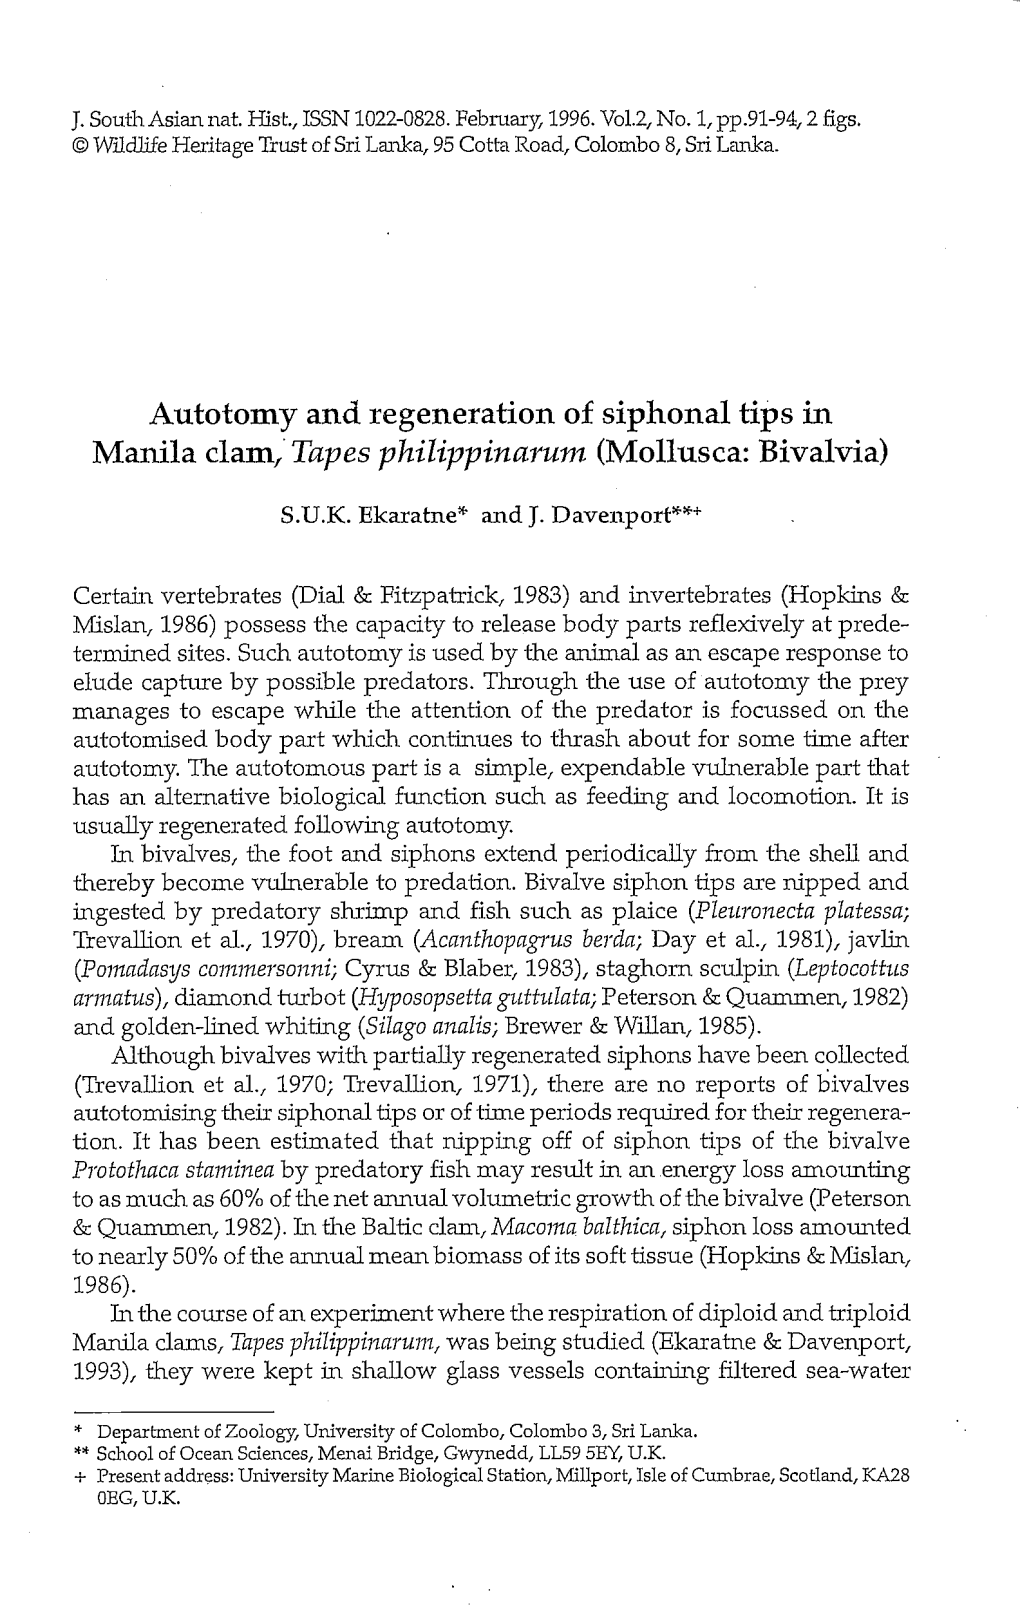 Autotomy and Regeneration of Siphonal Tips in Manila Clam, Tapes Philippinarum (Mollusca: Bivalvia)